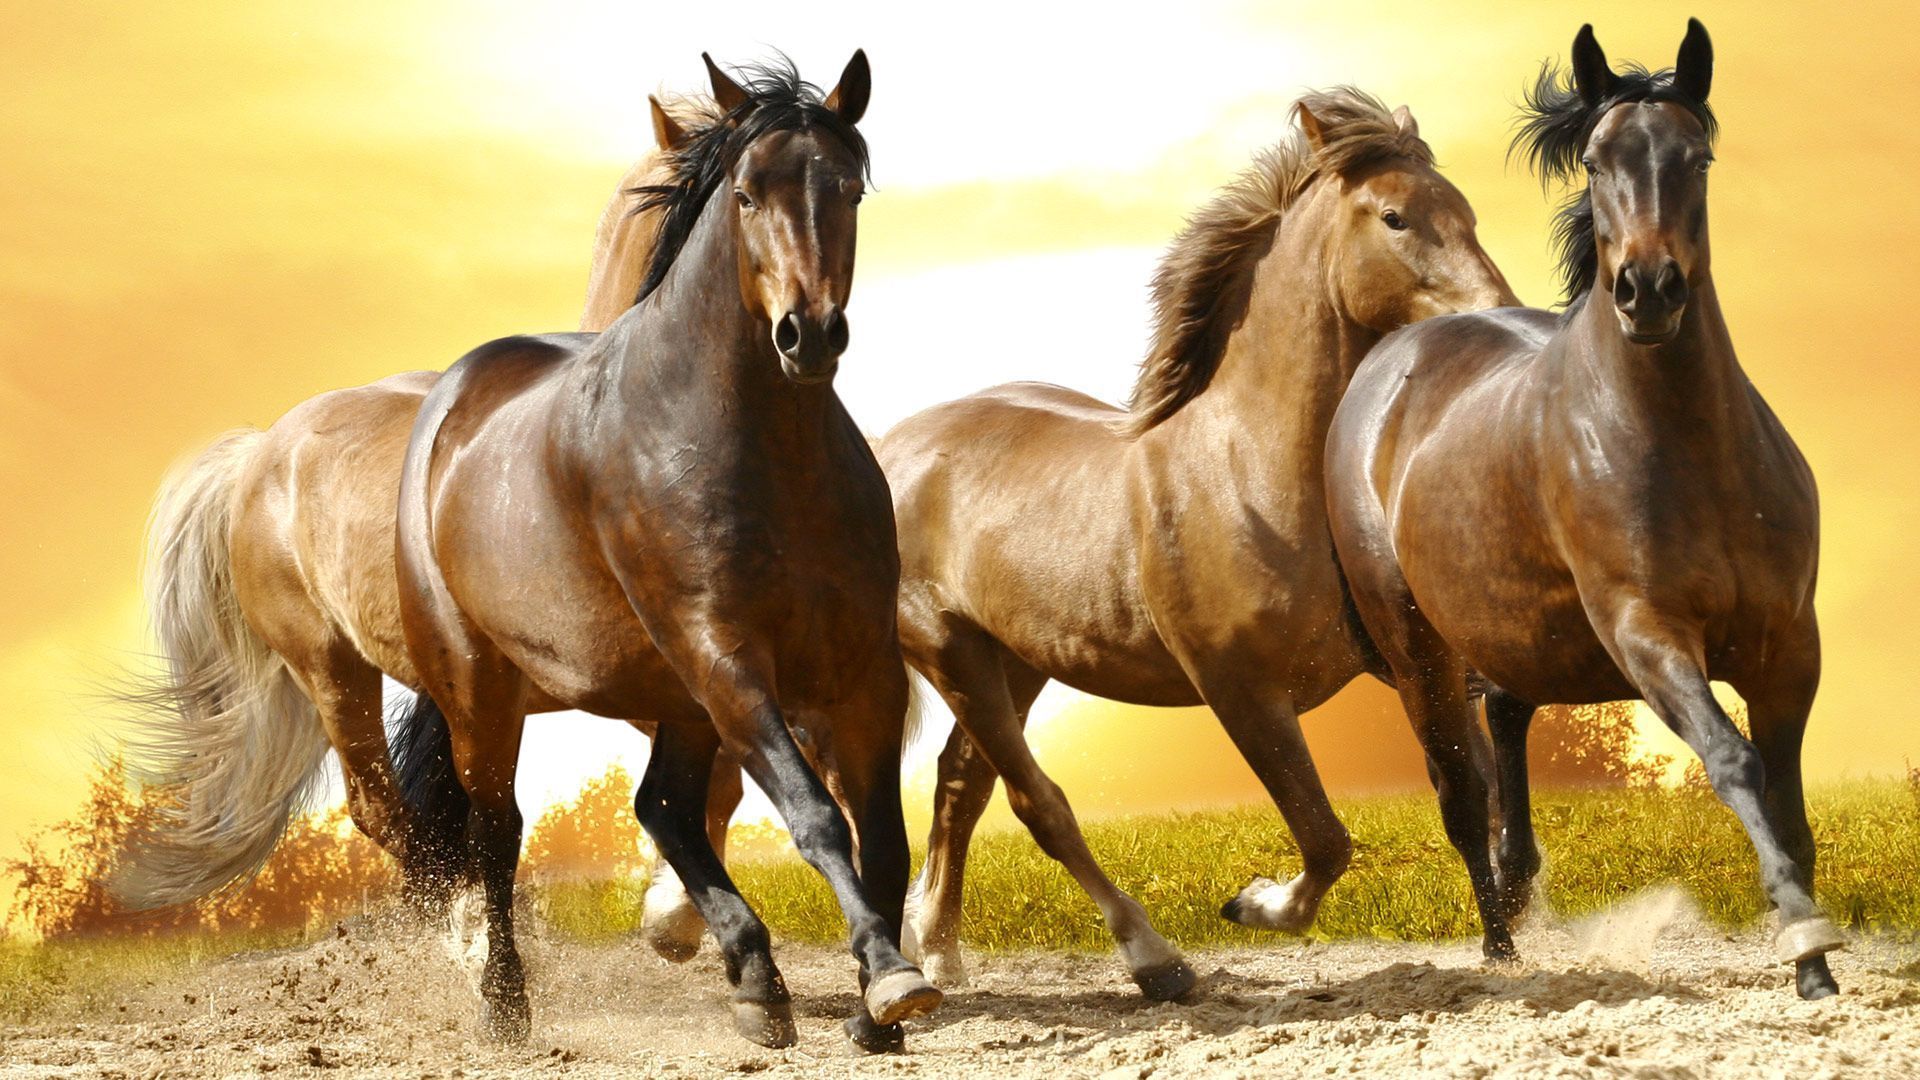 Beautiful wild horses wallpapers Free full hd wallpapers for